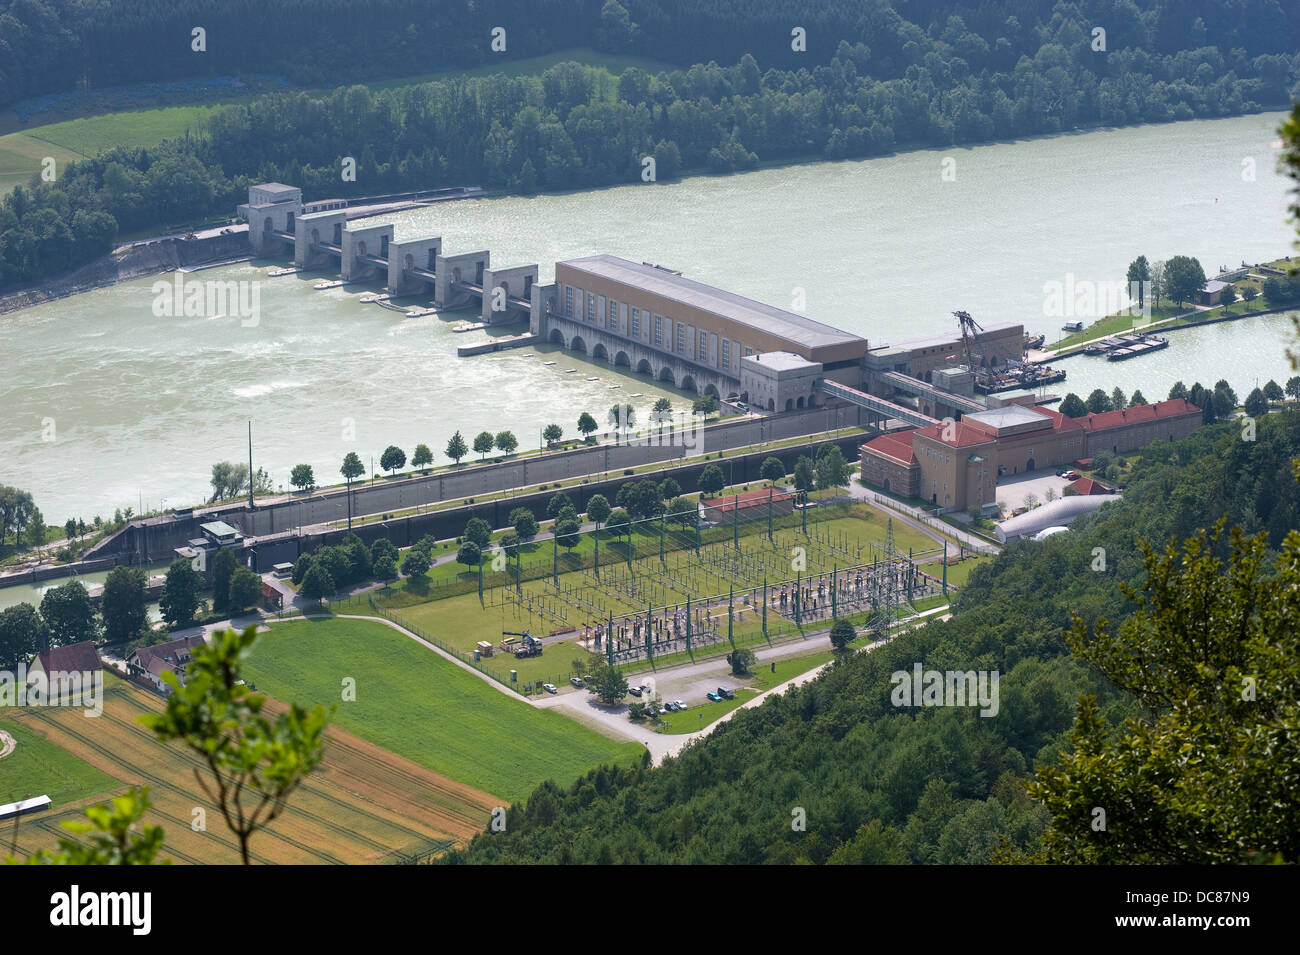 The hyrdo-electric power station with the sluice of Jochenstein in the Donau river in Southern Germany Stock Photo